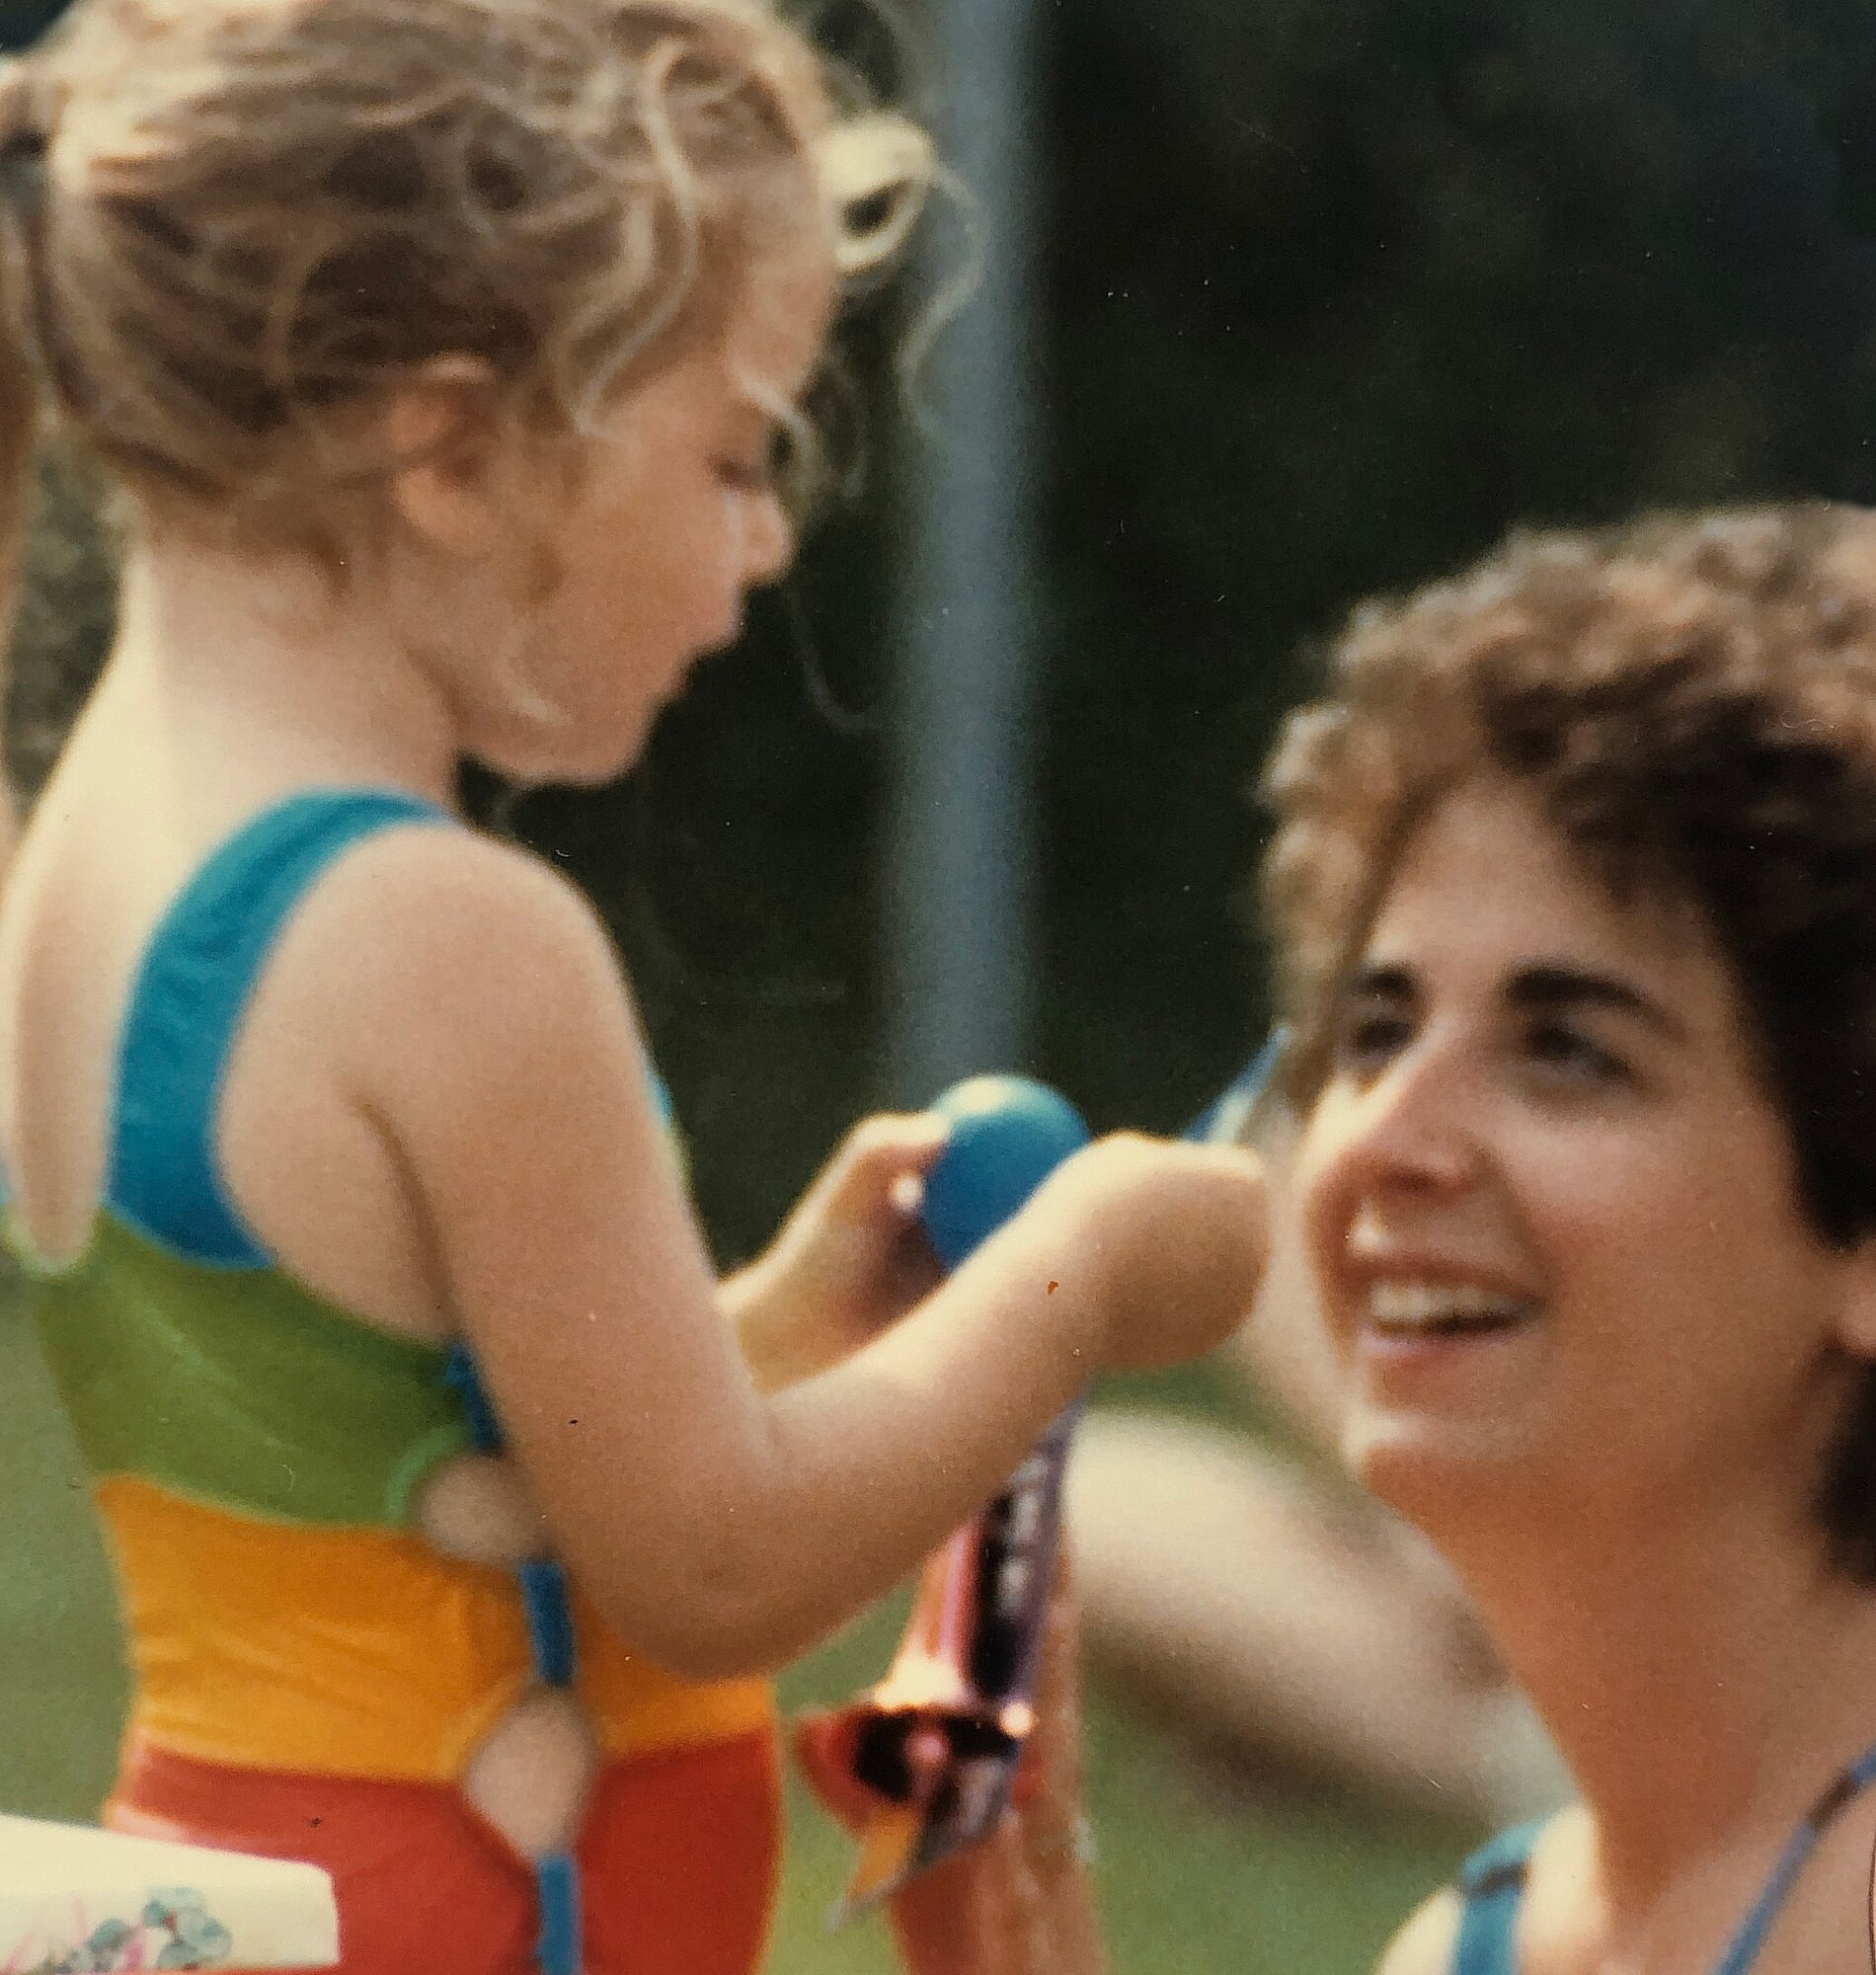 Andrea Hunwick's and her mom in 1985. (Courtesy photo)